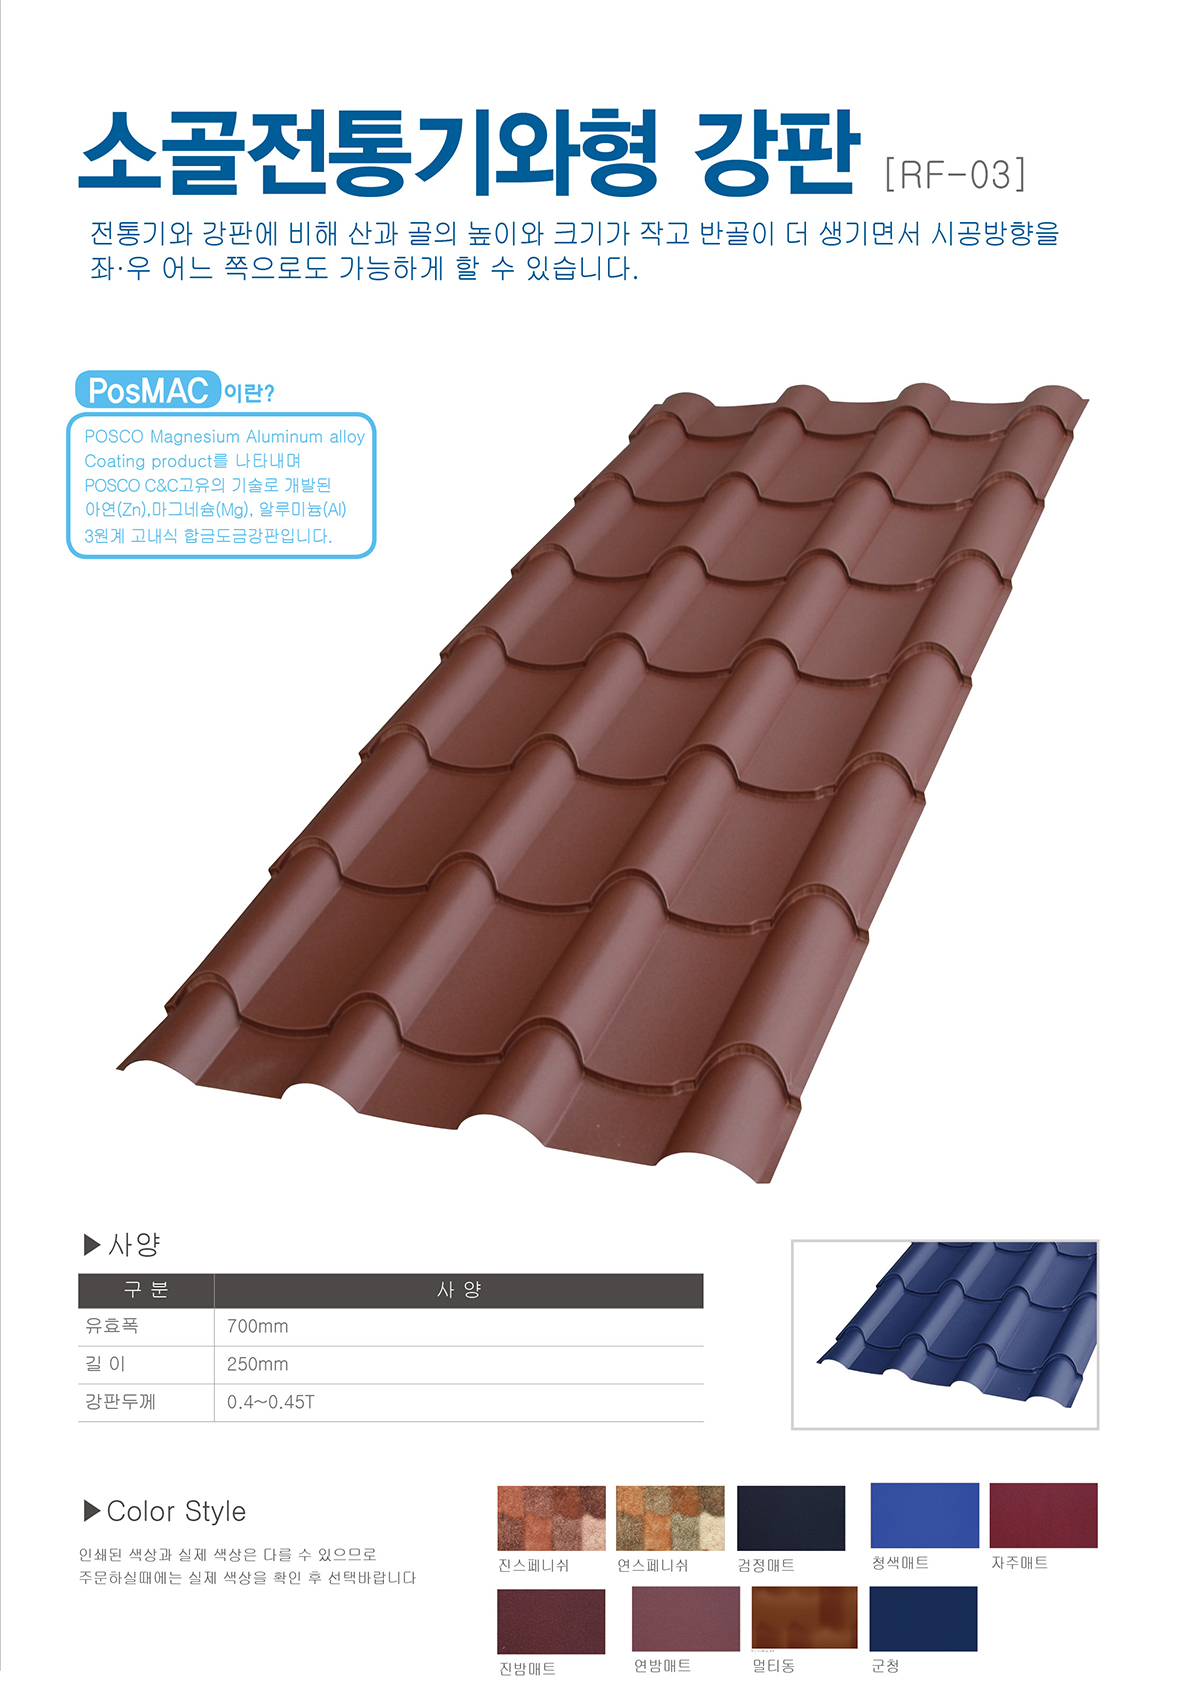 Small Corrugated Traditional Roof Tiles [RF-03]